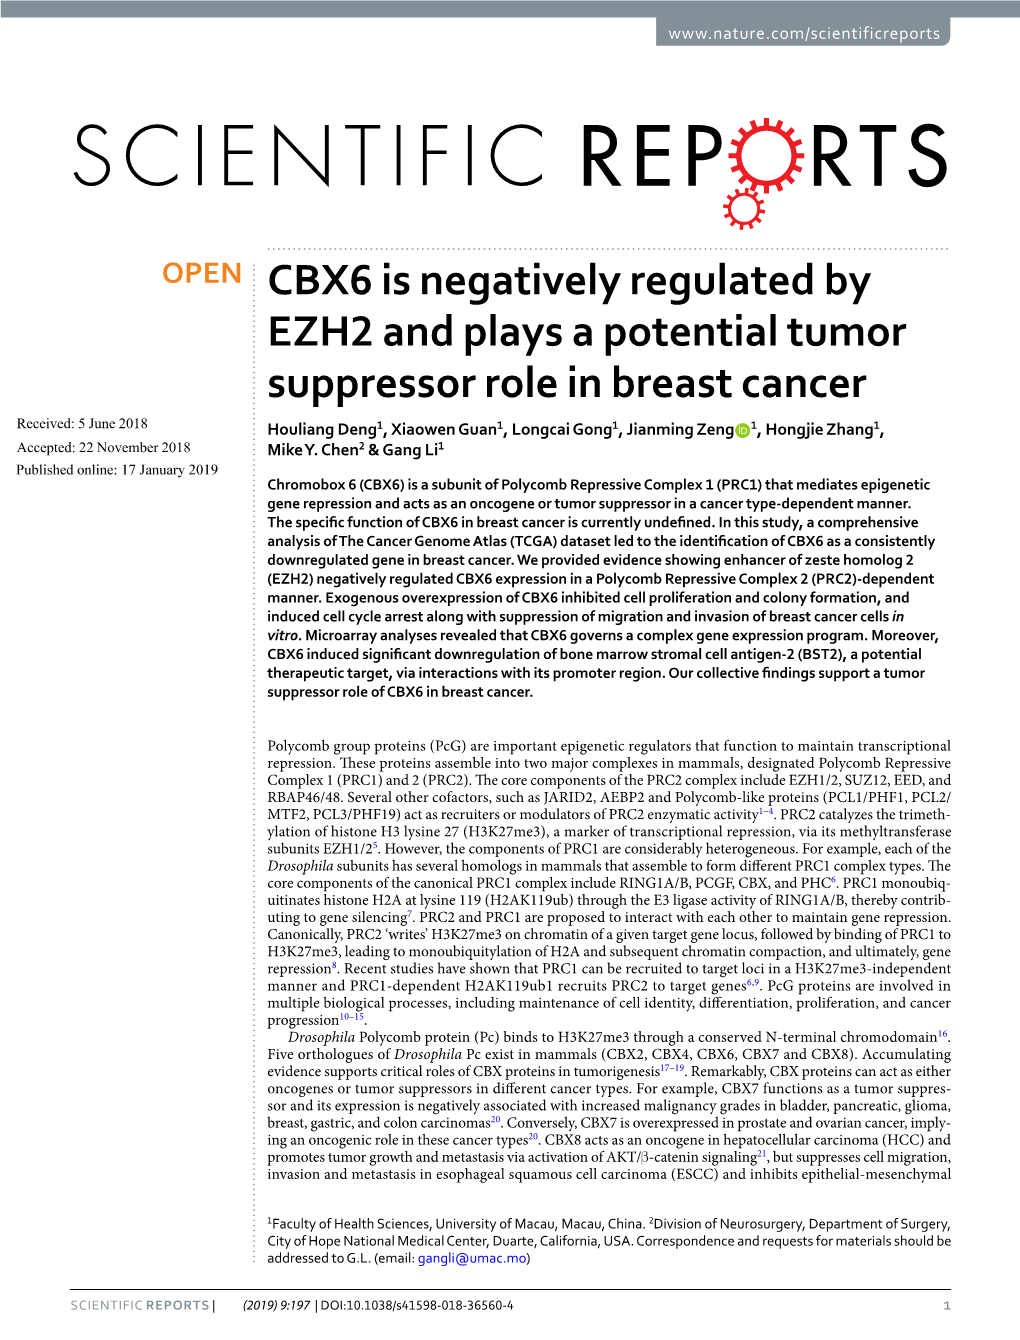 CBX6 Is Negatively Regulated by EZH2 and Plays a Potential Tumor Suppressor Role in Breast Cancer